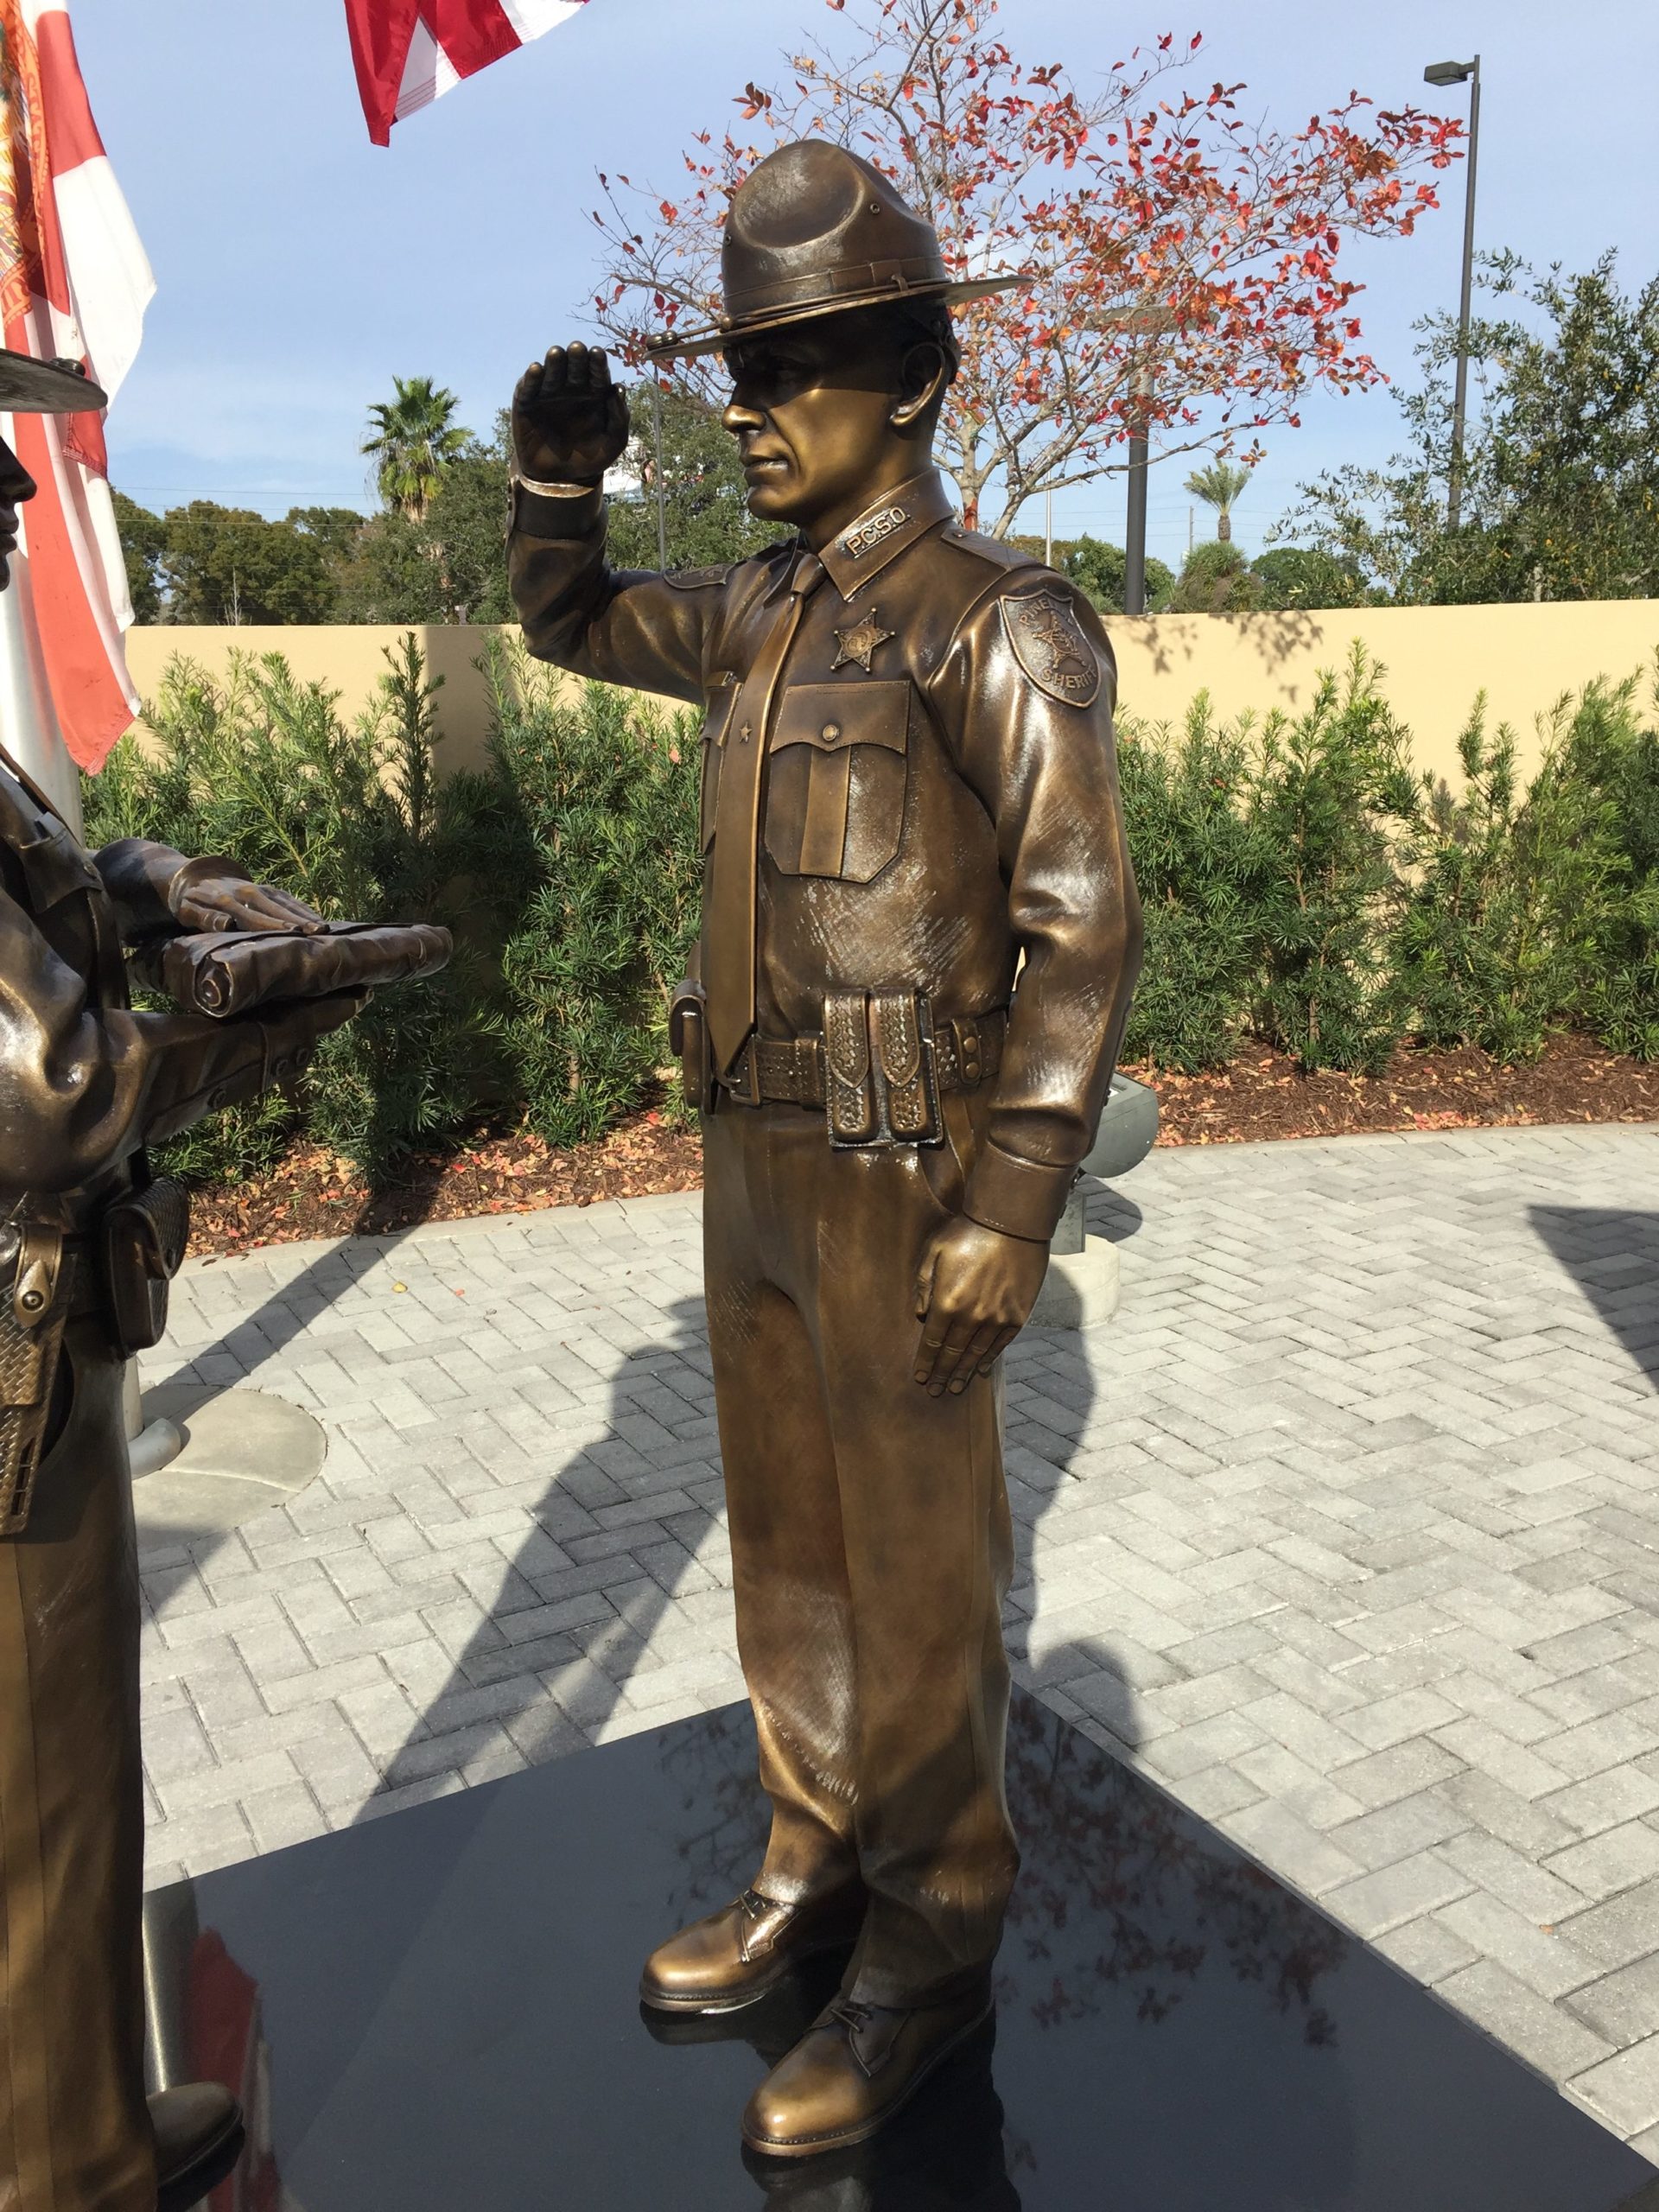 saluting officer sculpted with your uniform, patches, badges, equipment, and gear.